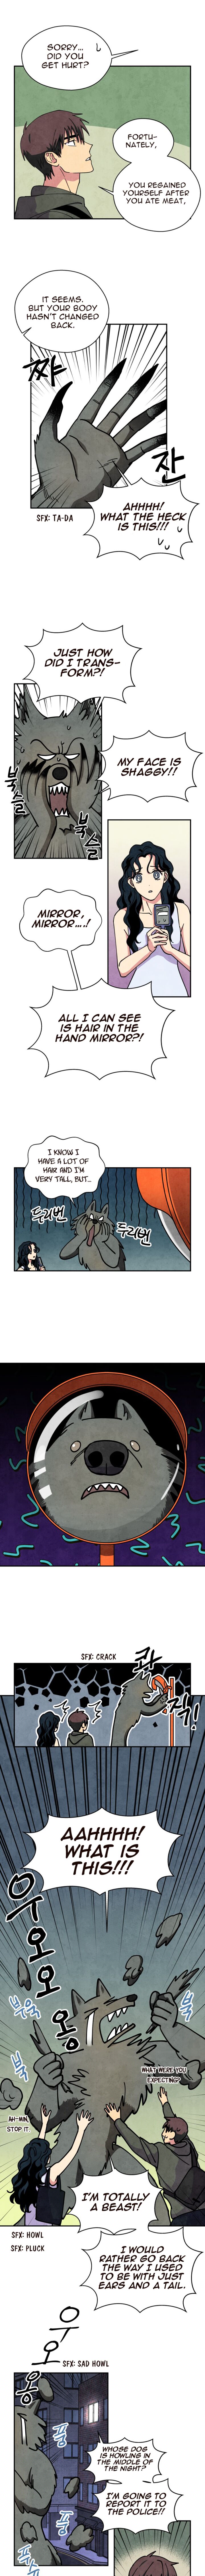 The Little Red Riding Hood Chapter 23 Page 3